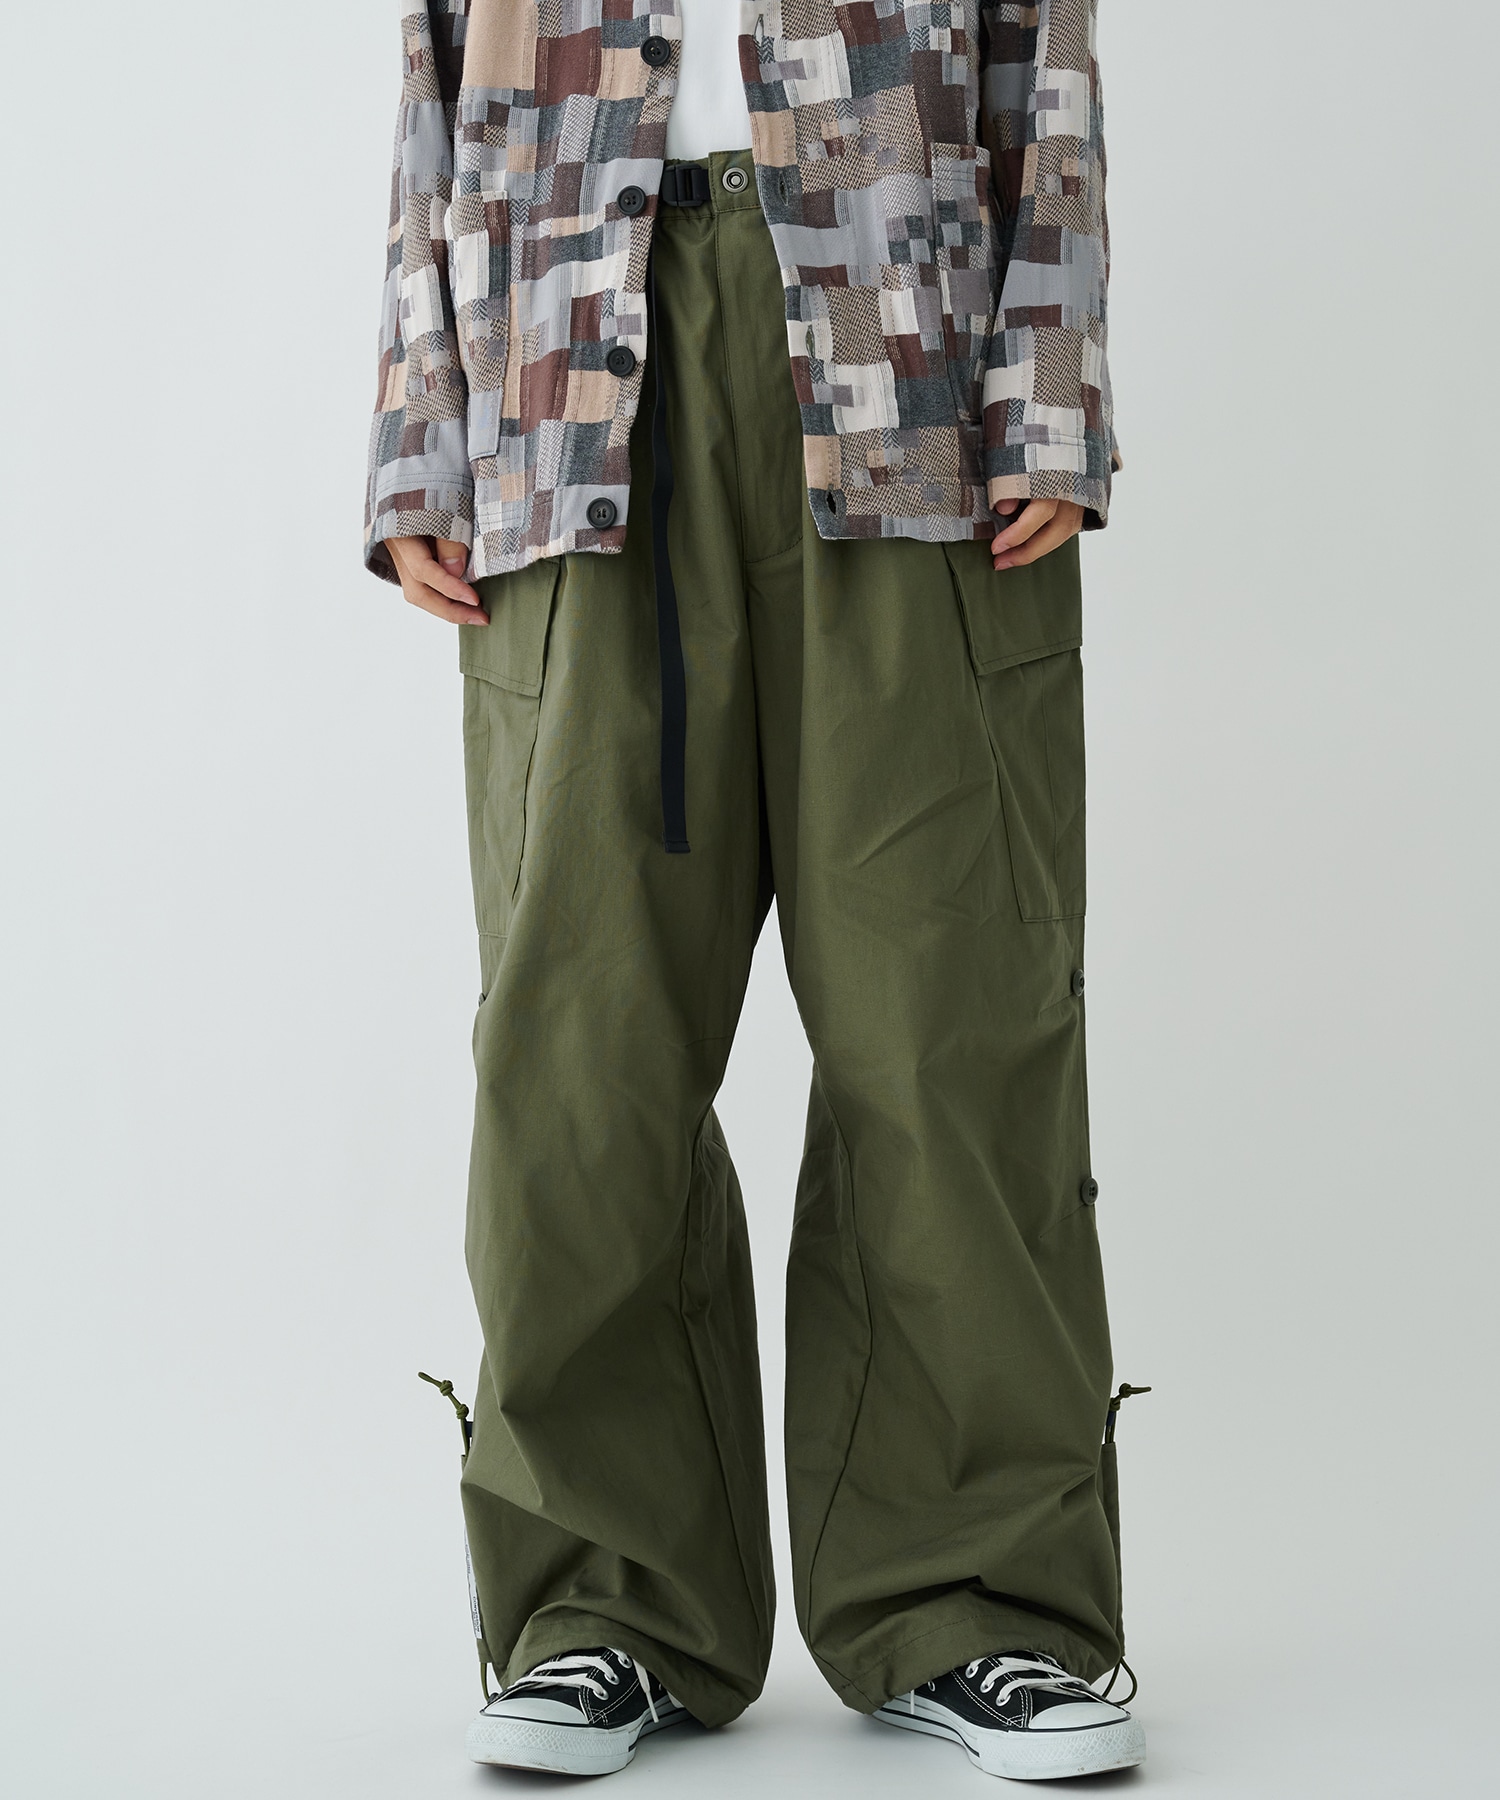 THE CHANGING LENGTH FATIGUE PANTS